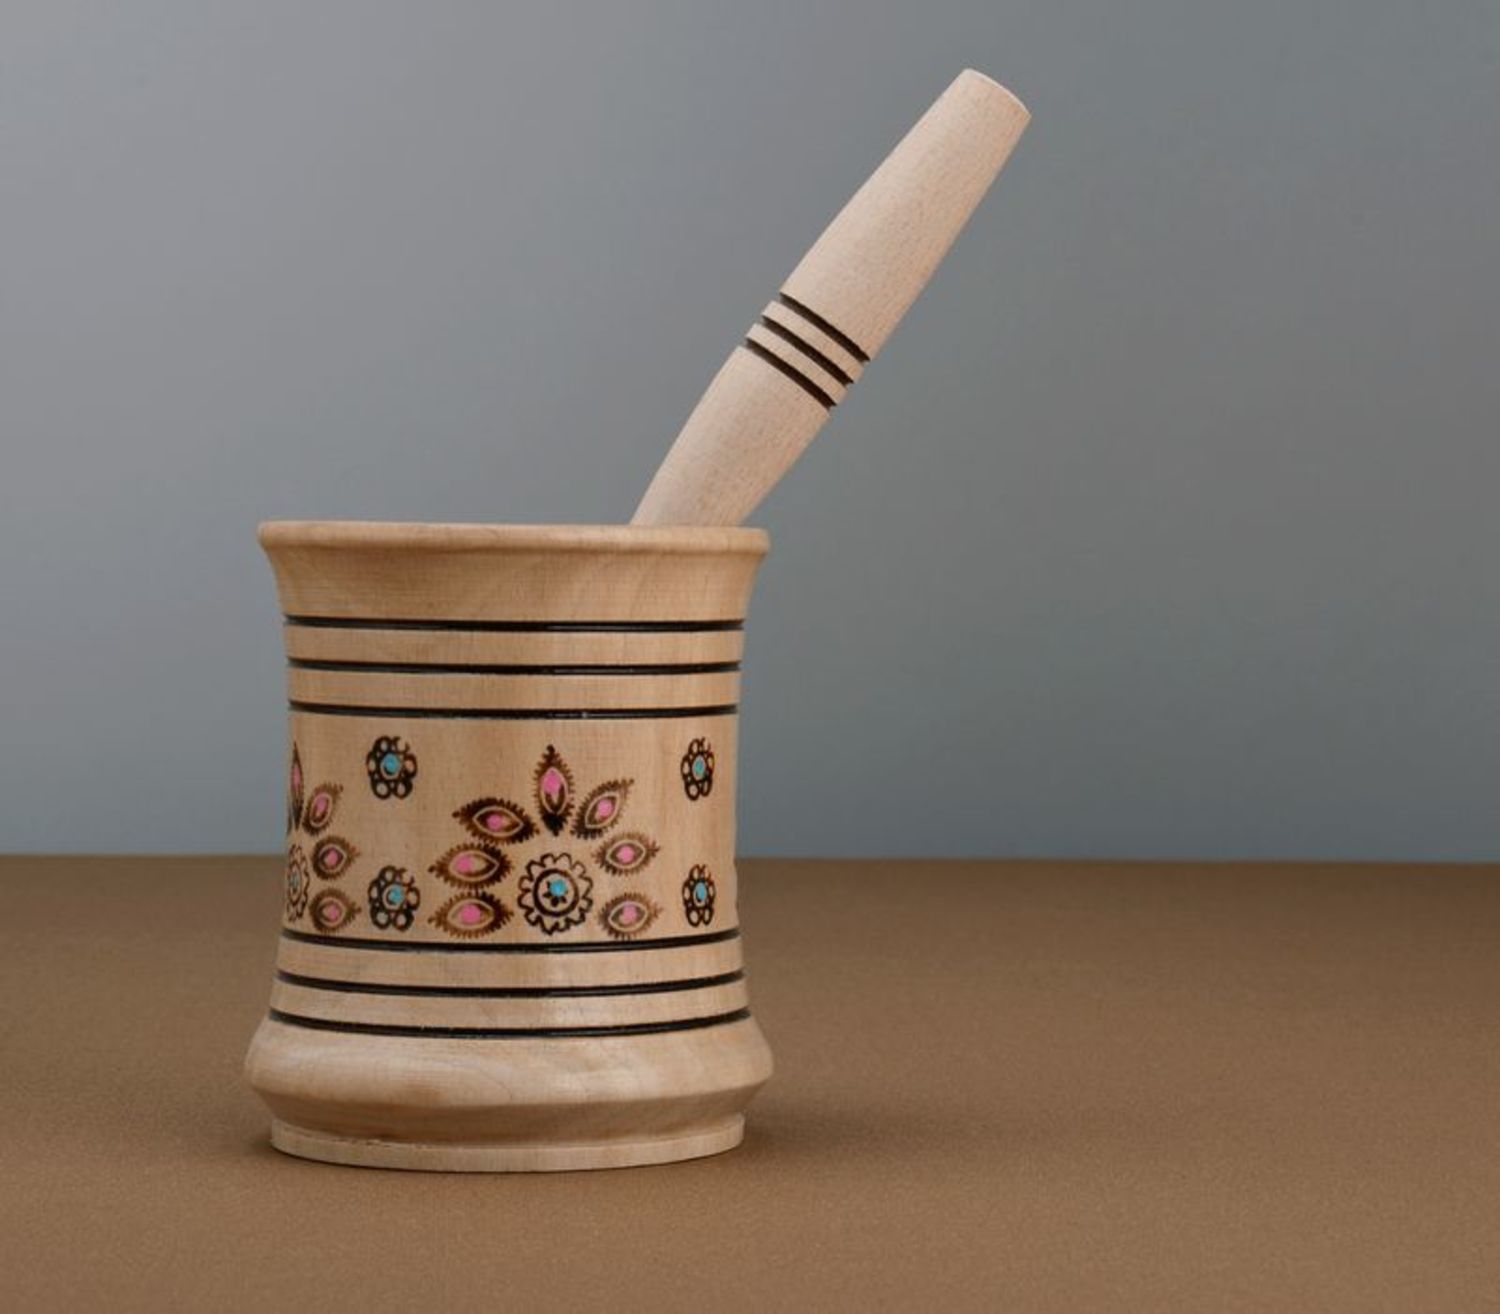 Wooden mortar with pestle photo 4